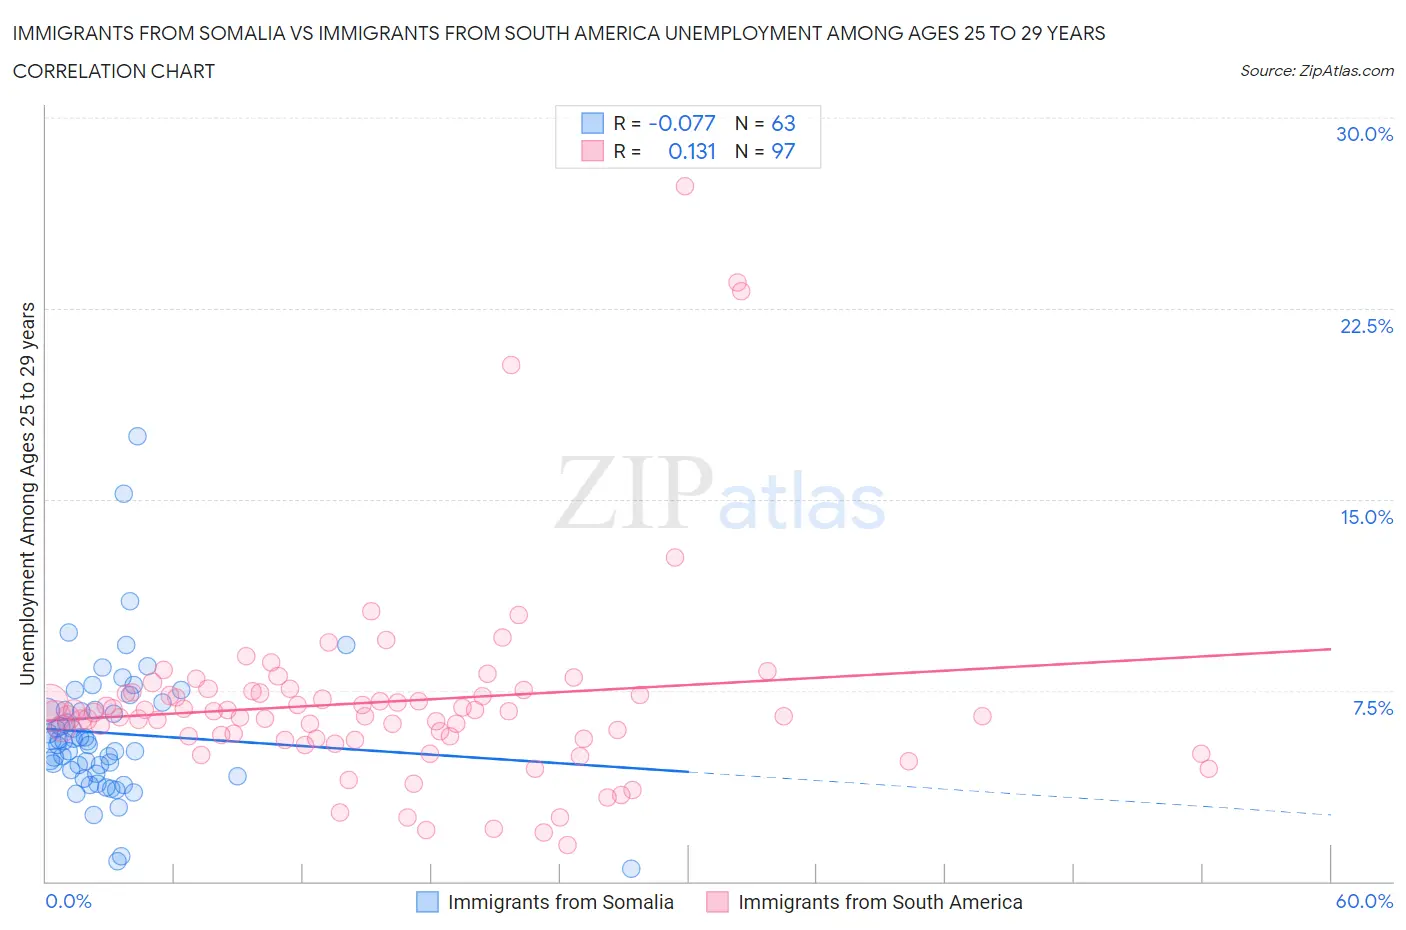 Immigrants from Somalia vs Immigrants from South America Unemployment Among Ages 25 to 29 years